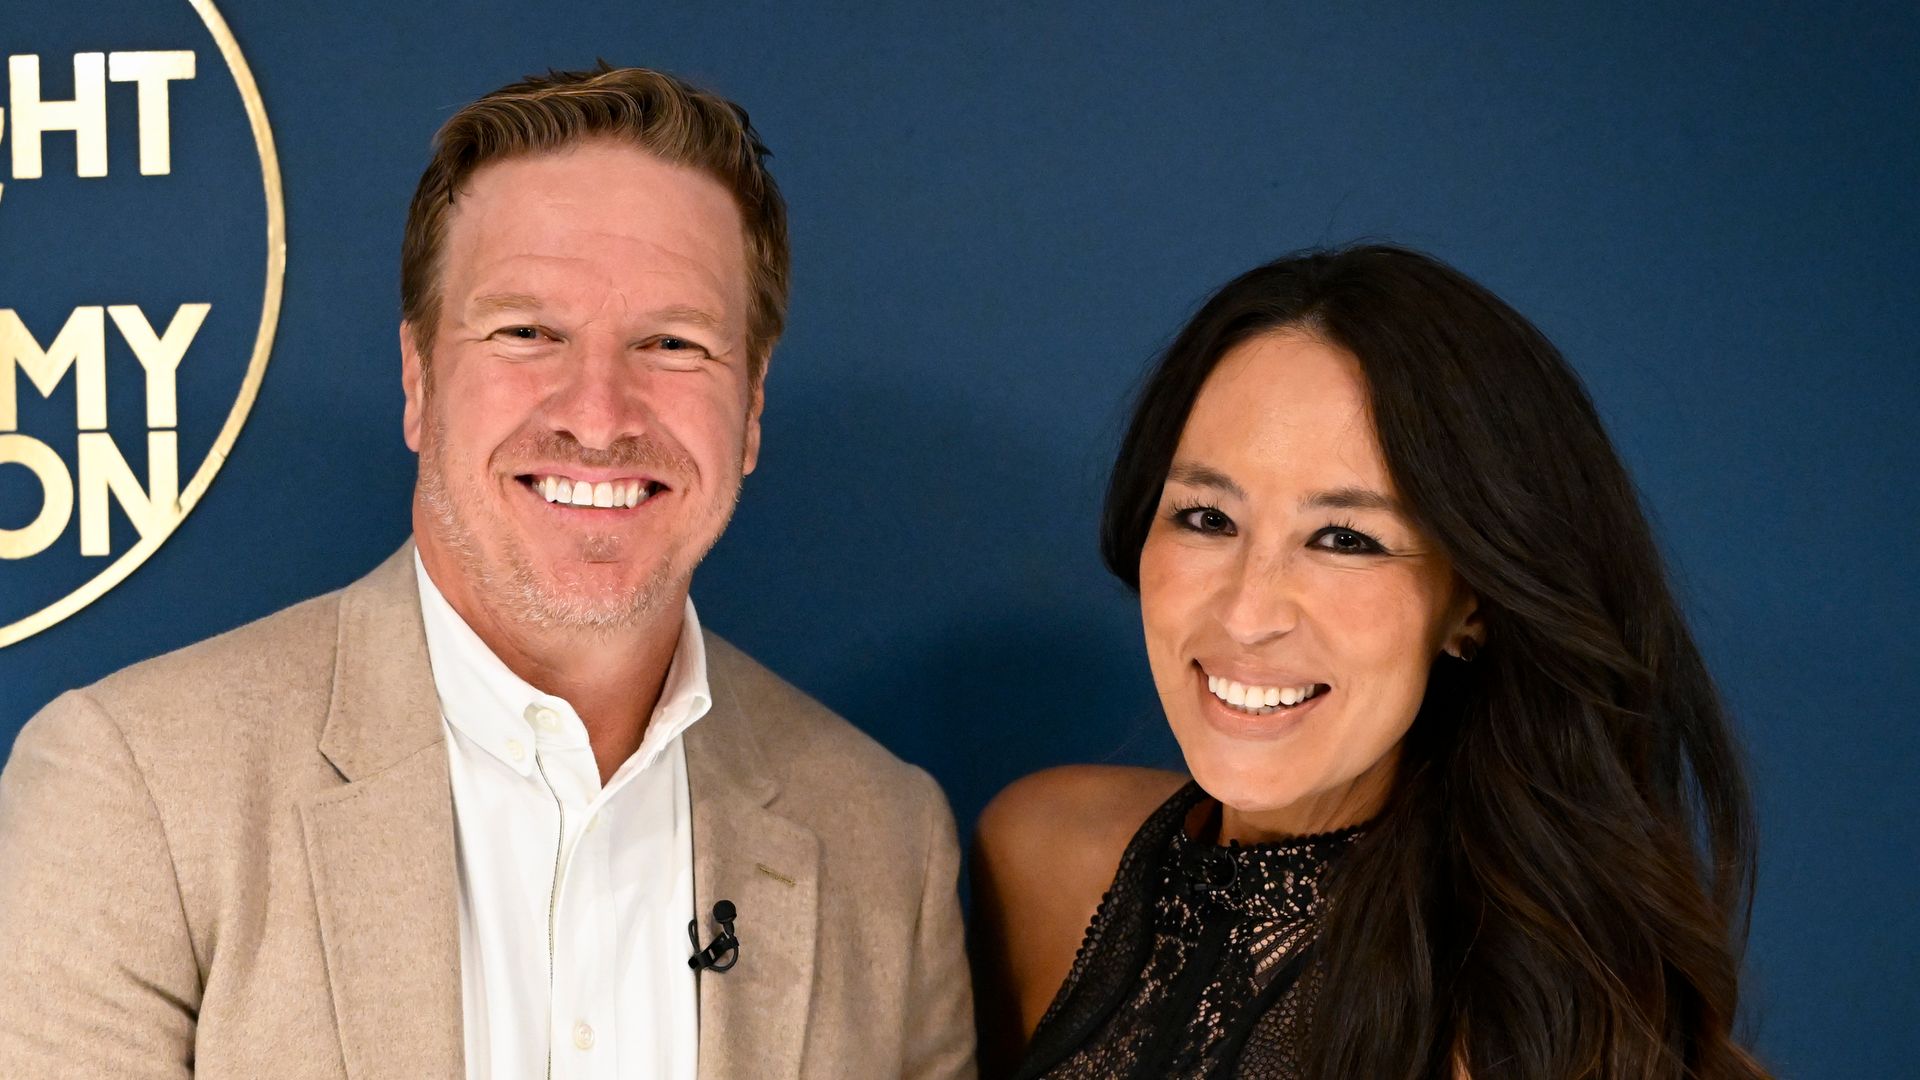 TV personalities Chip Gaines and Joanna Gaines pose together backstage on Tuesday, February 14, 2023 -- (Photo by: Todd Owyoung/NBC via Getty Images)